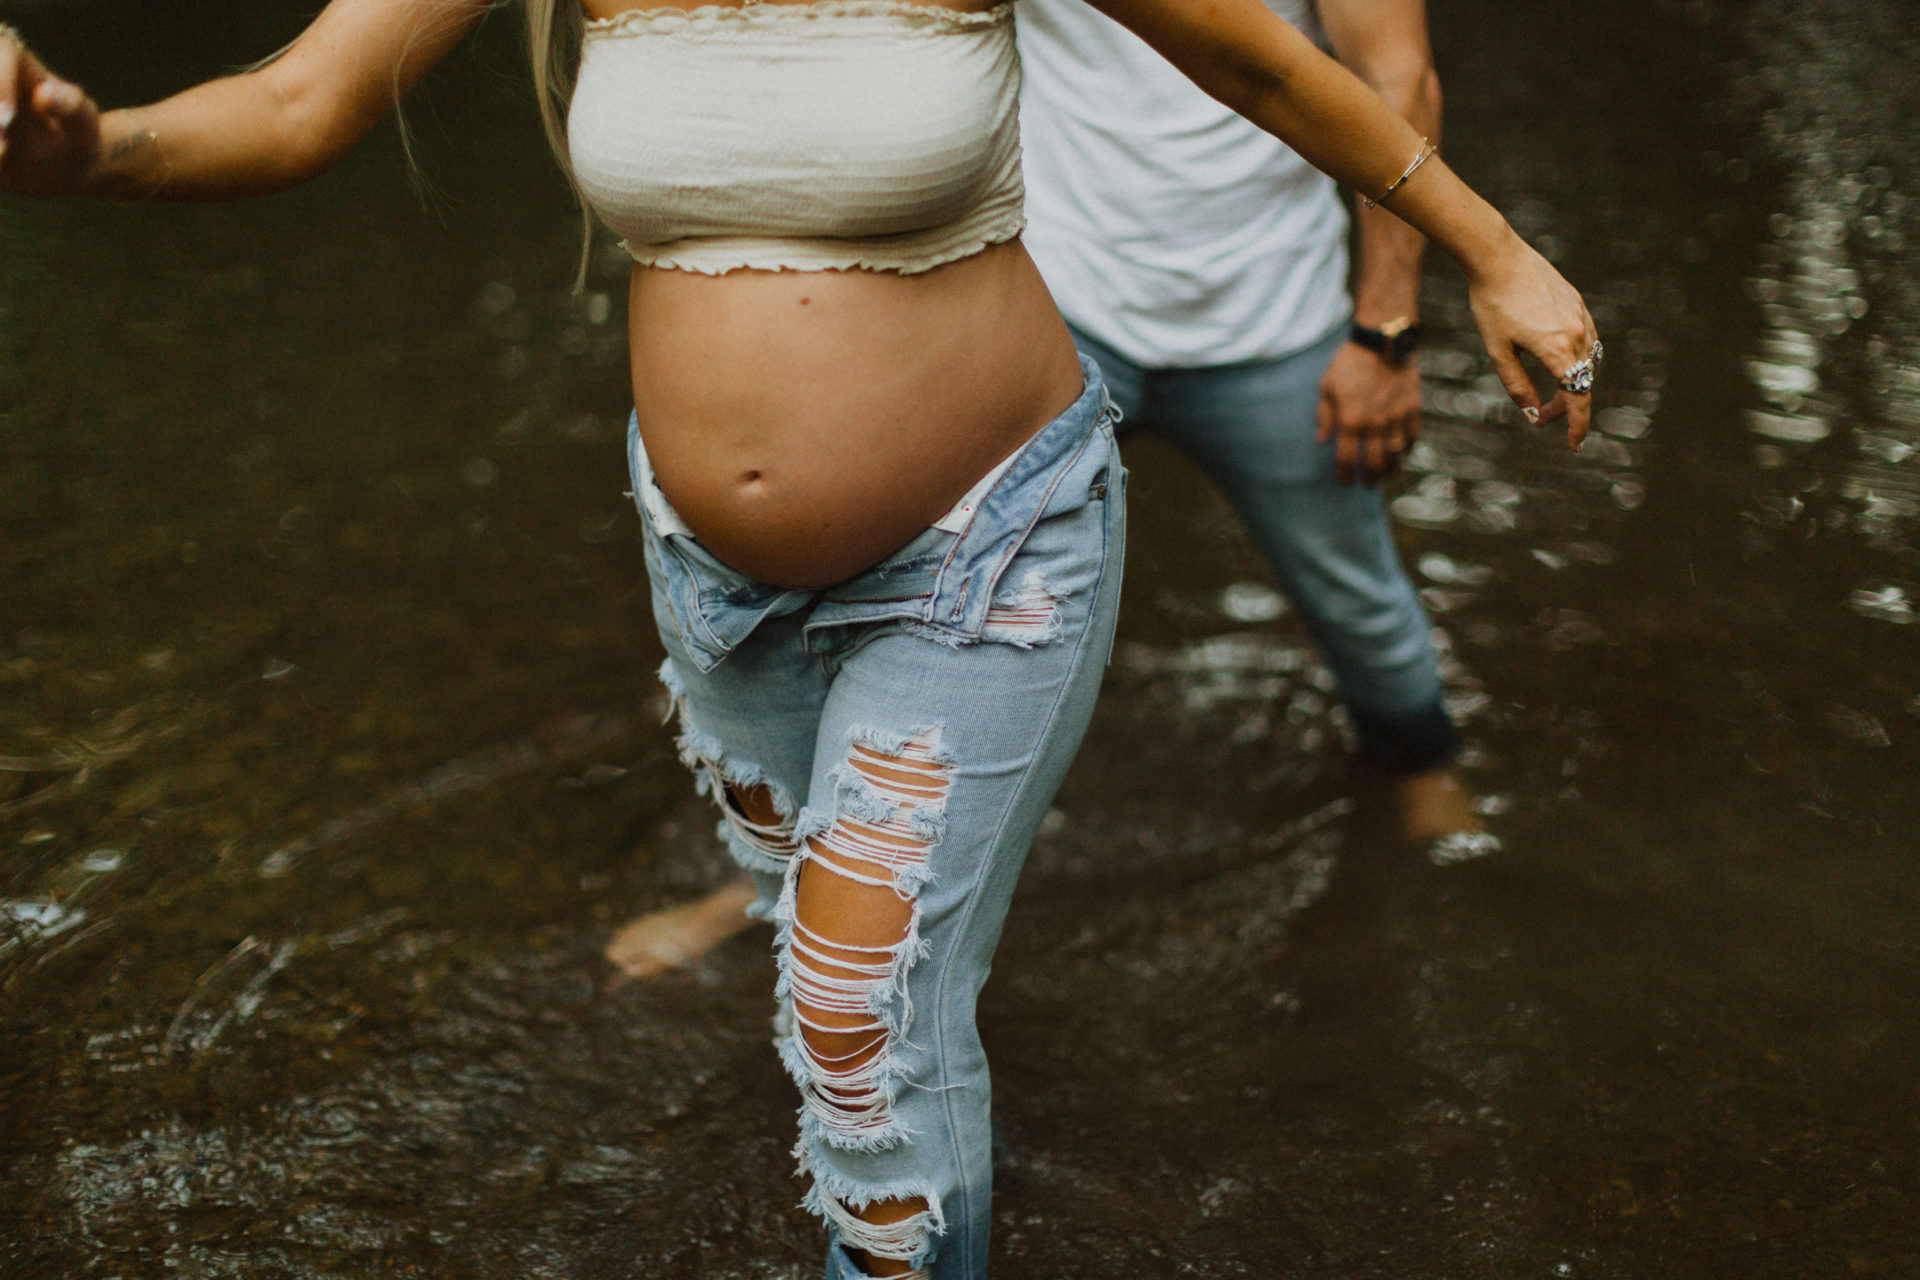 his and hers playful maternity shoot in a creek